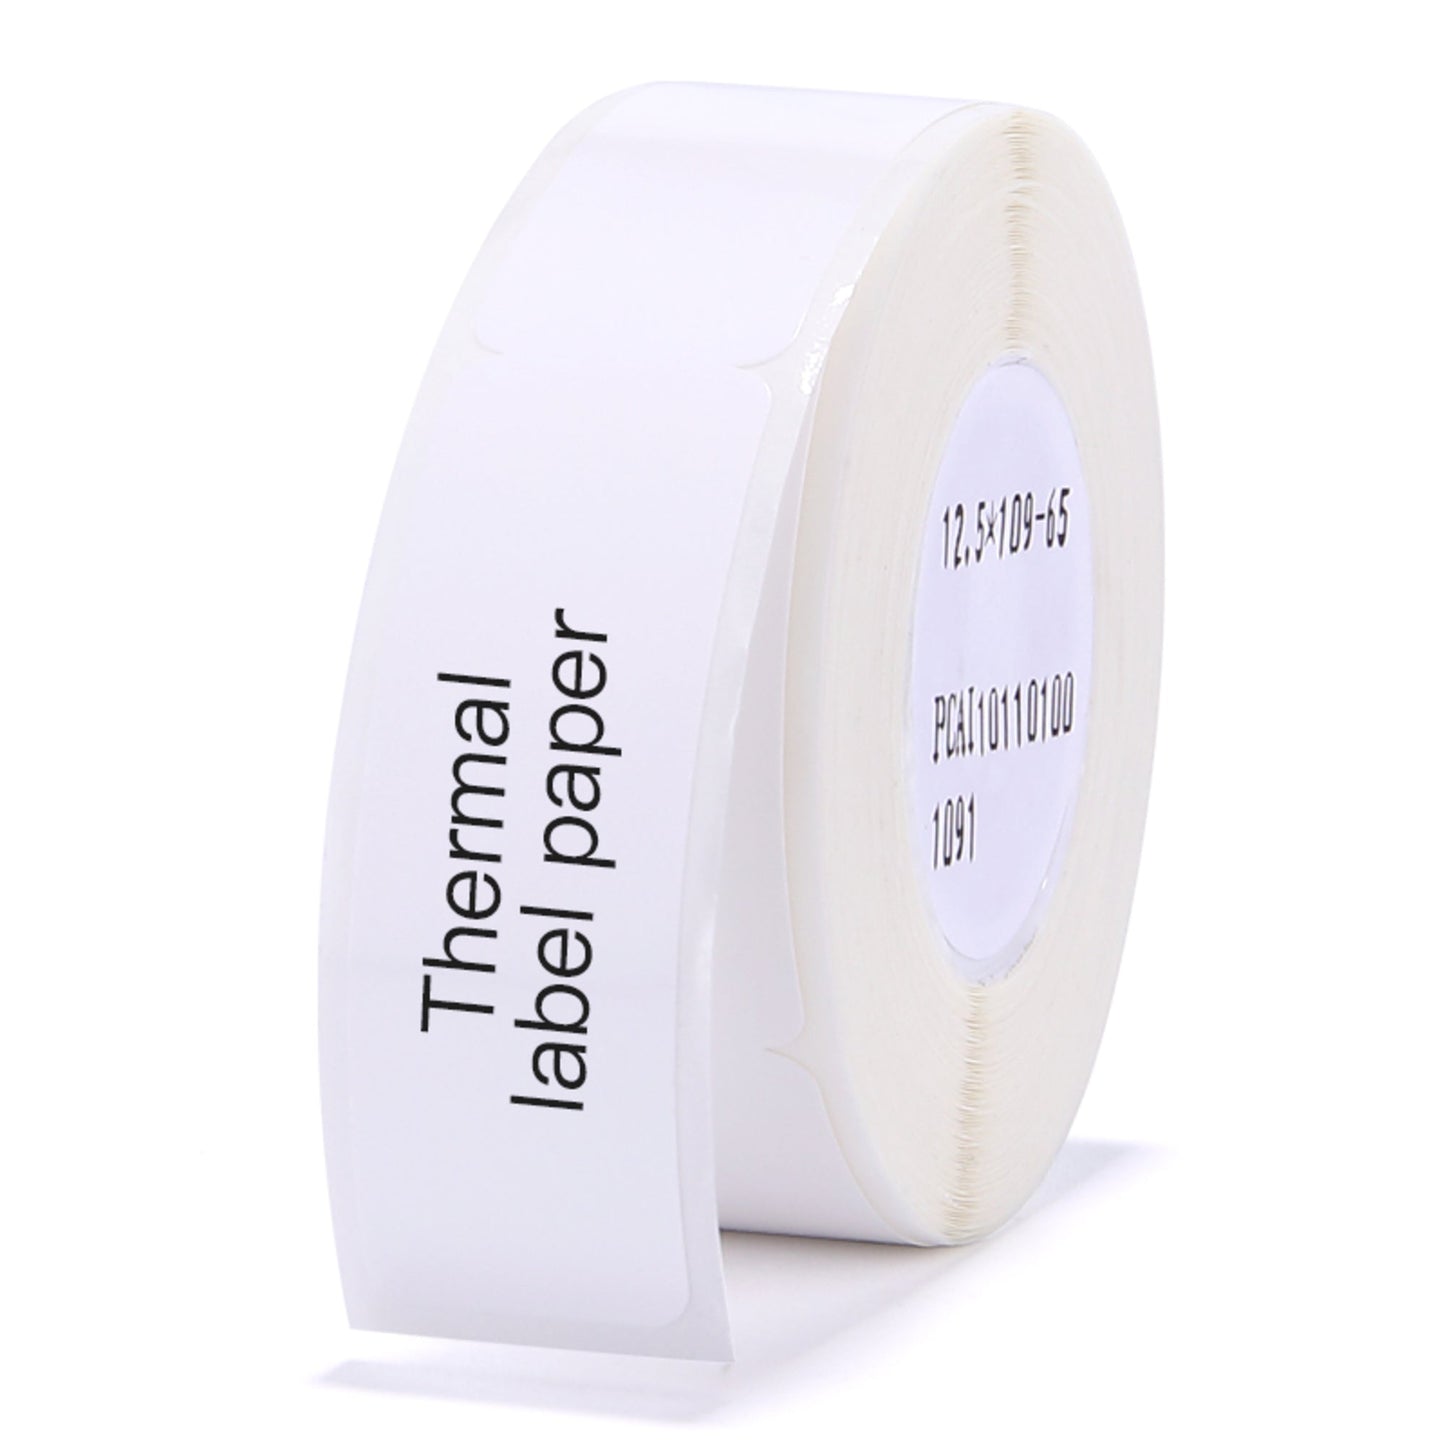 NIIMBOT - D11 / D101 / D110 - RXL 12.5*109MM  - 65 LABELS PER ROLL - CABLE - WHITE